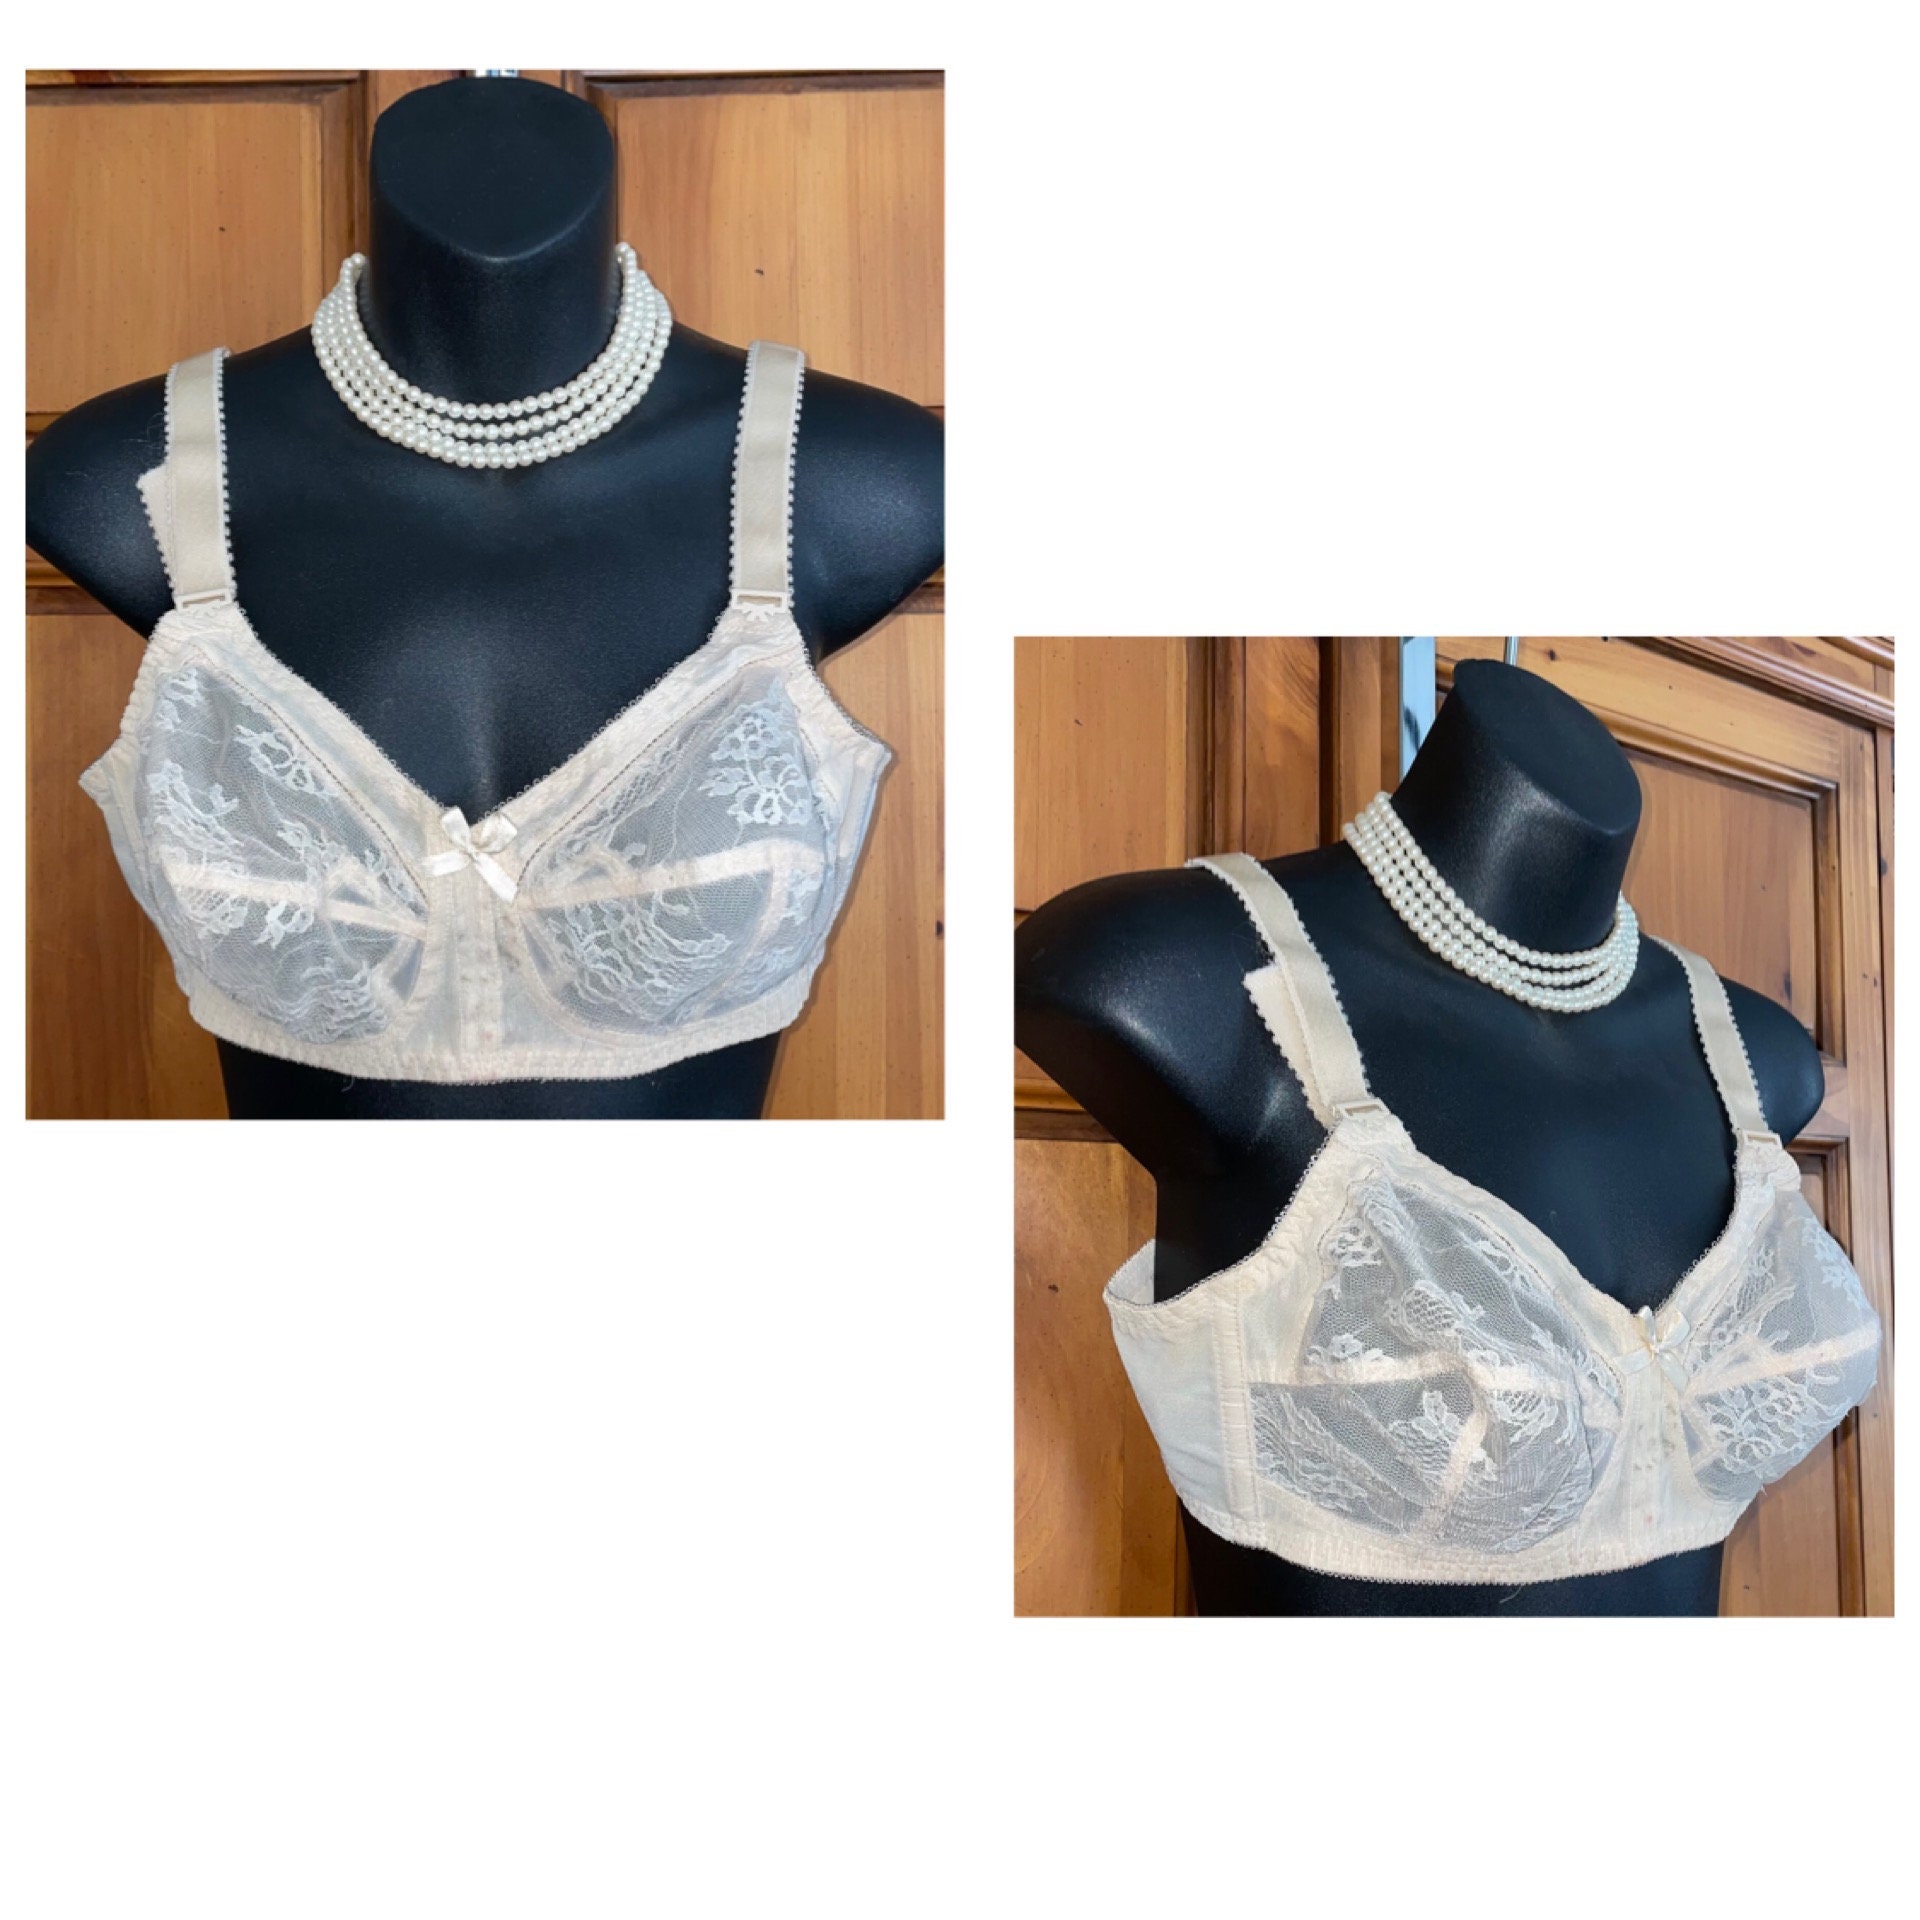 Vintage 1960s White Lace 2 Part Cup Bra Size 38C by Playtex, Style